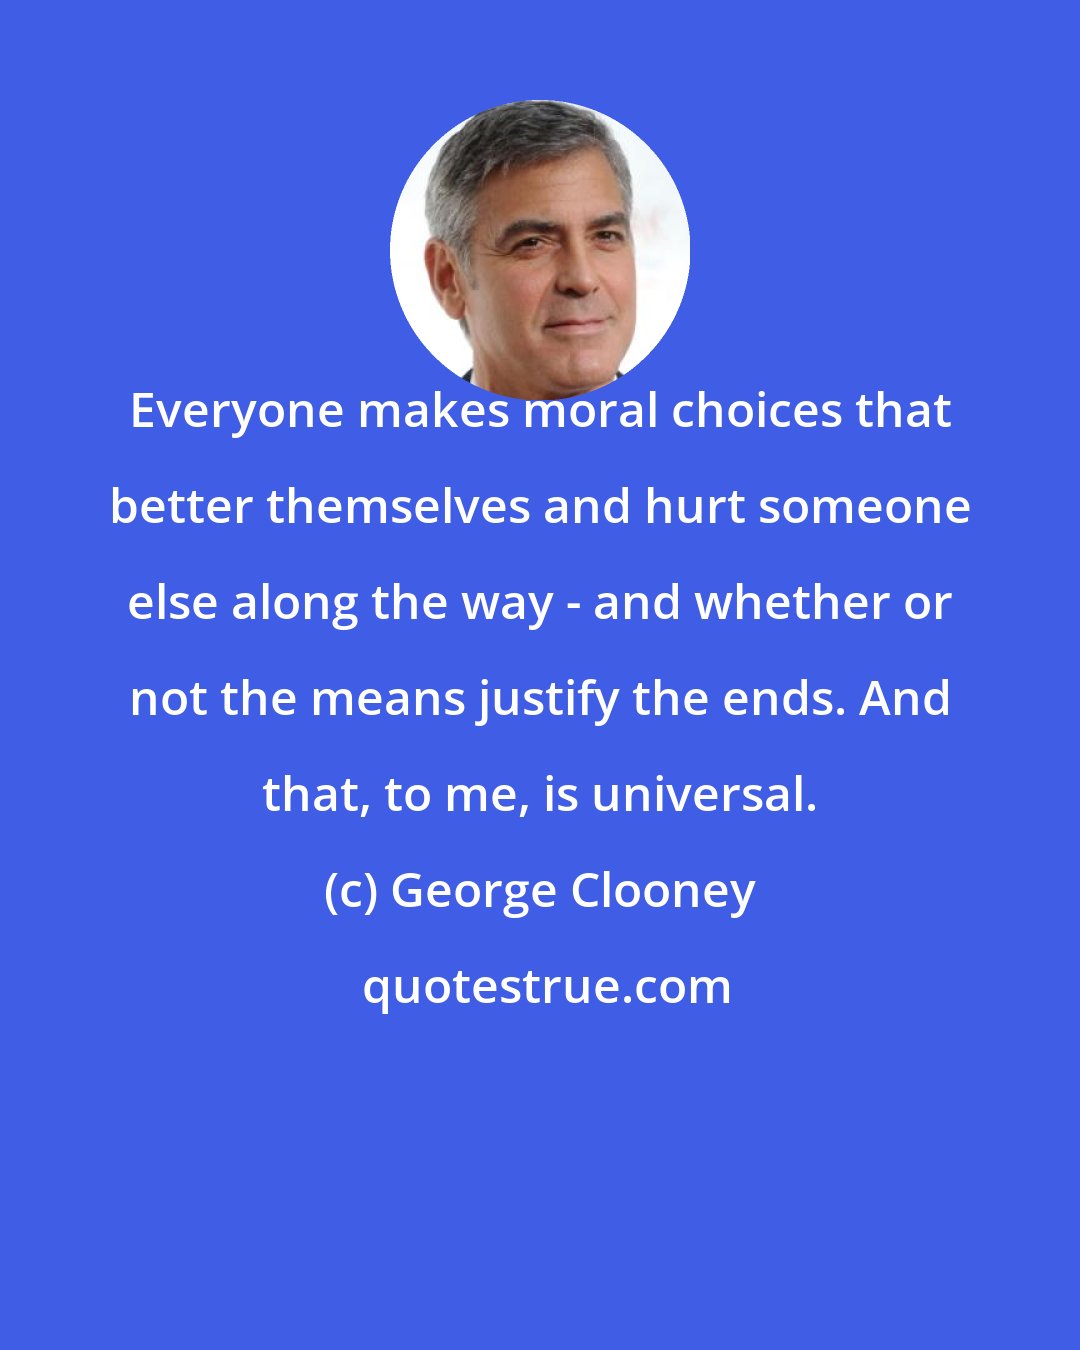 George Clooney: Everyone makes moral choices that better themselves and hurt someone else along the way - and whether or not the means justify the ends. And that, to me, is universal.